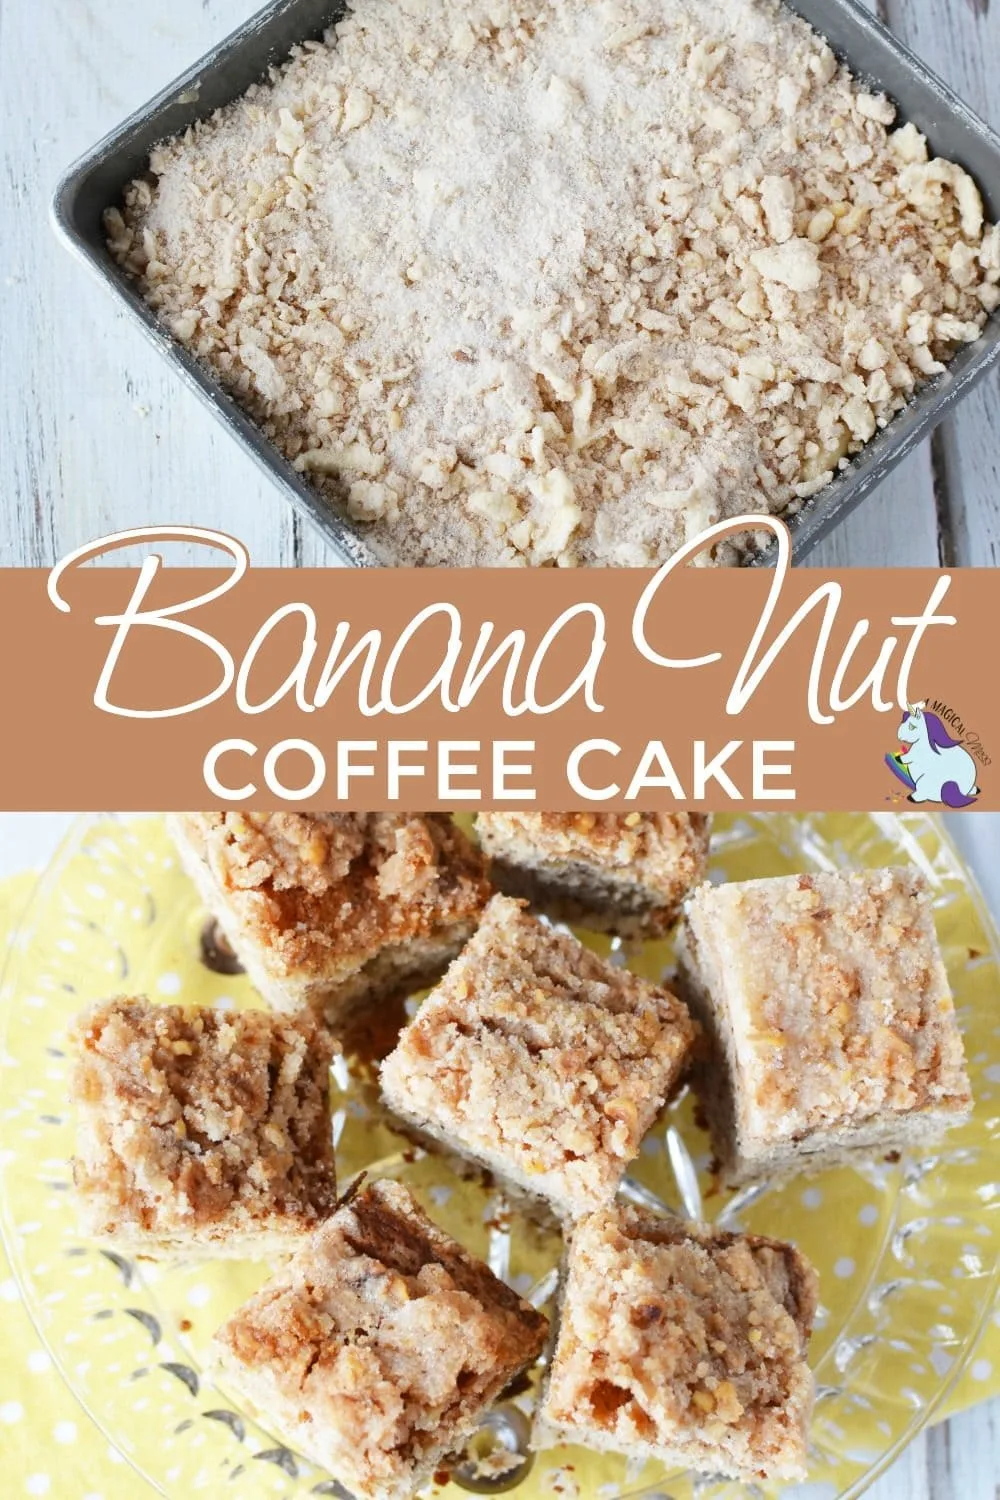 Banana nut coffee cake in a pan and sliced on a plate